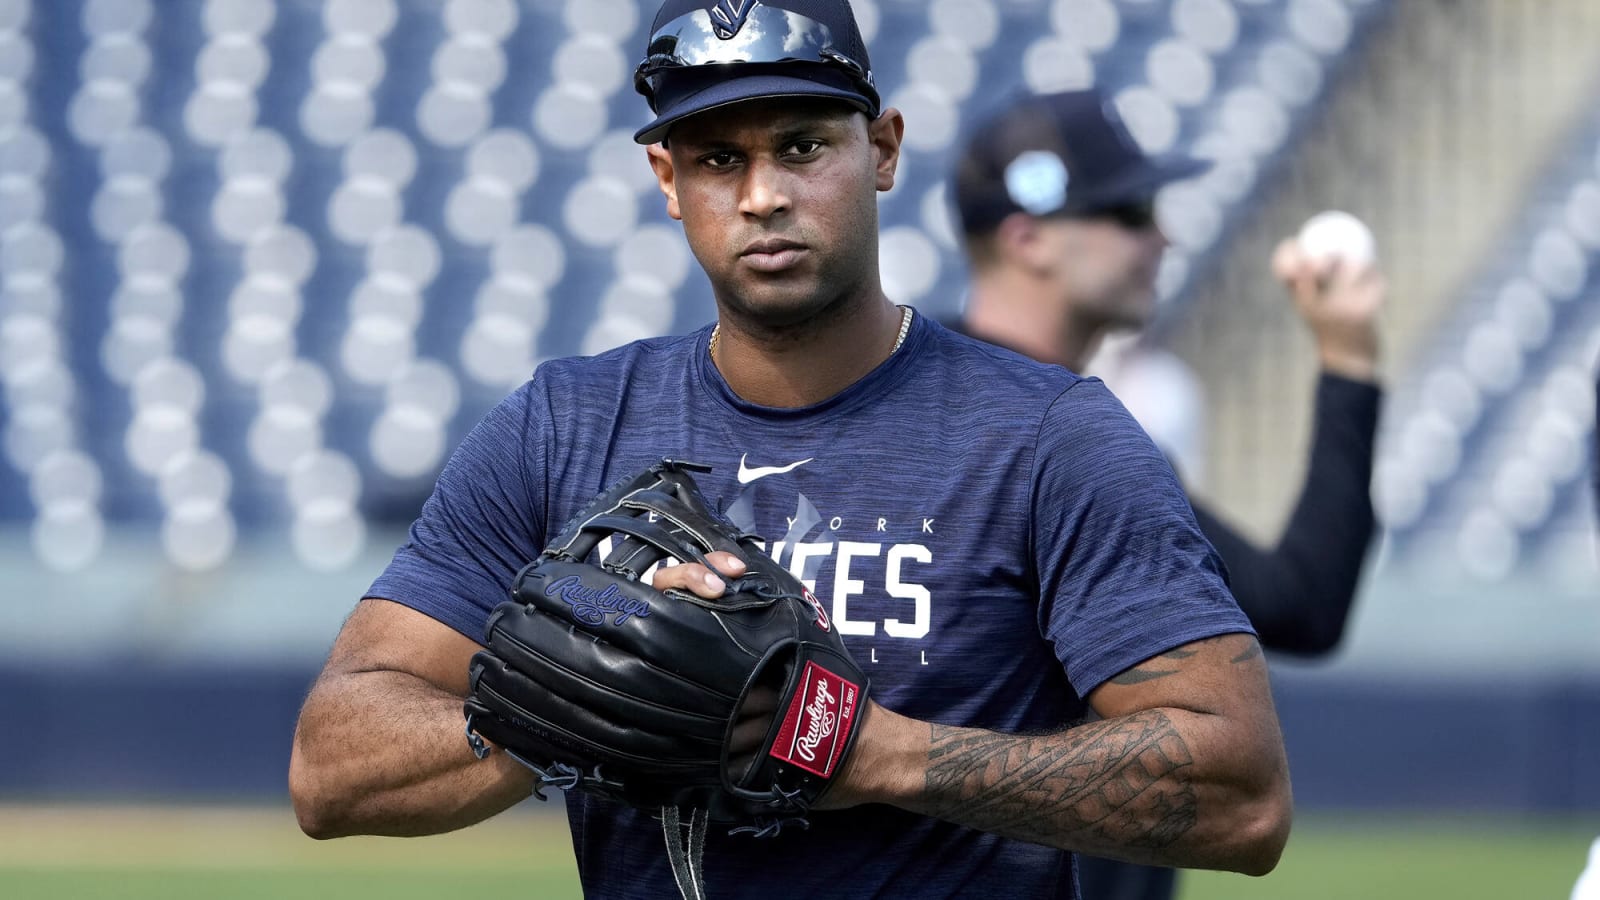 The Yankees are hoping Aaron Hicks can turn back the clock in 2023